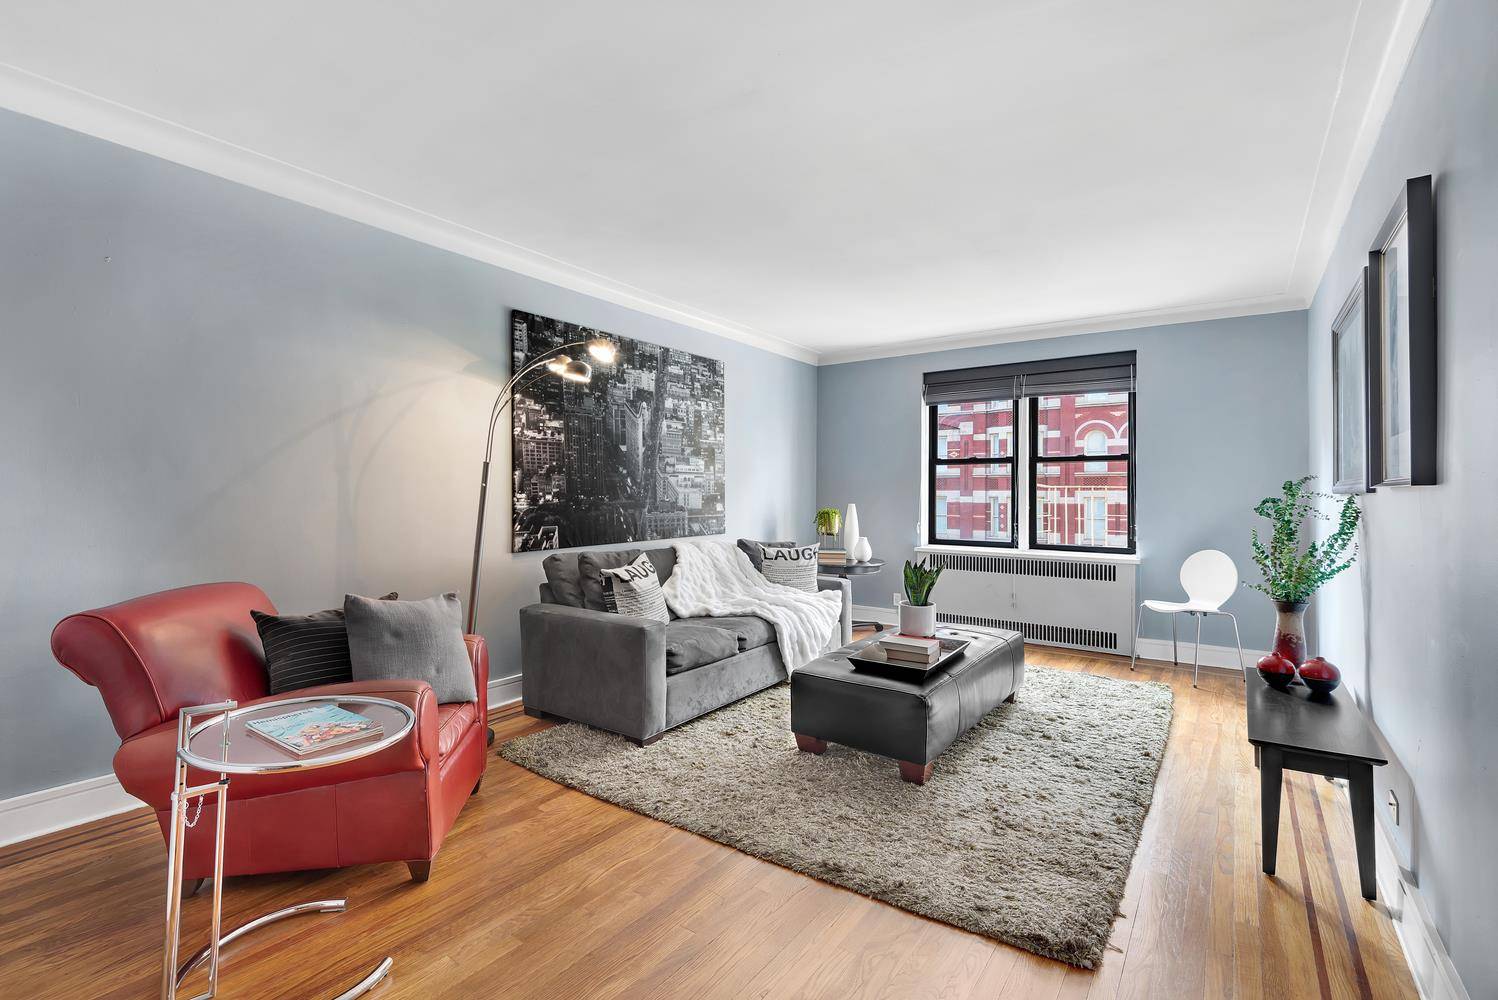 Welcome to this gorgeous and very well laid out home located in one of Manhattan's finest neighborhoods.